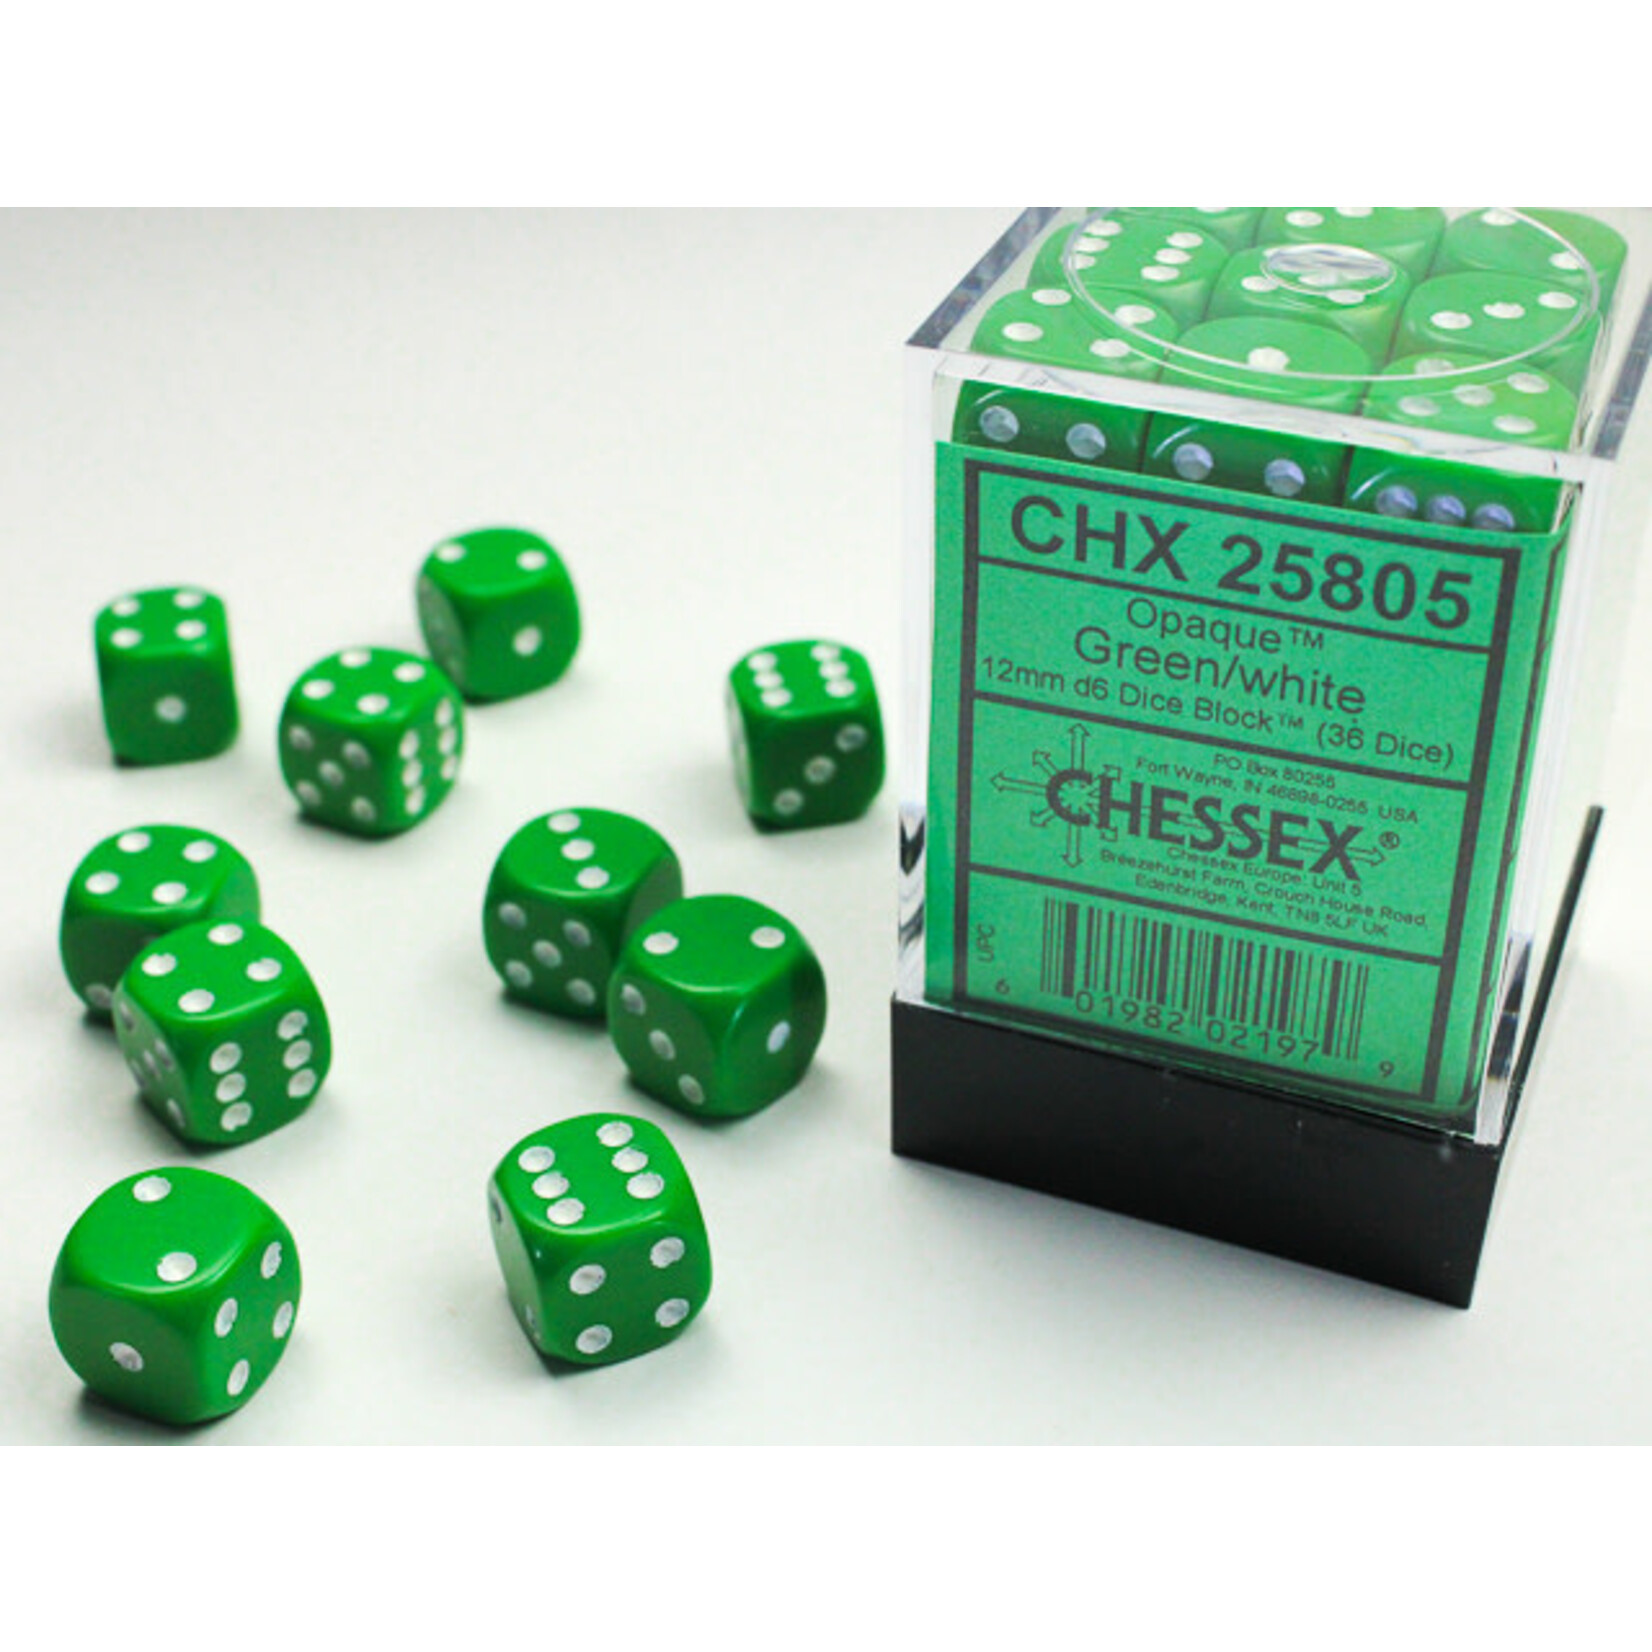 Chessex Opaque Green/white 12mm d6 Dice Block (36 dice)